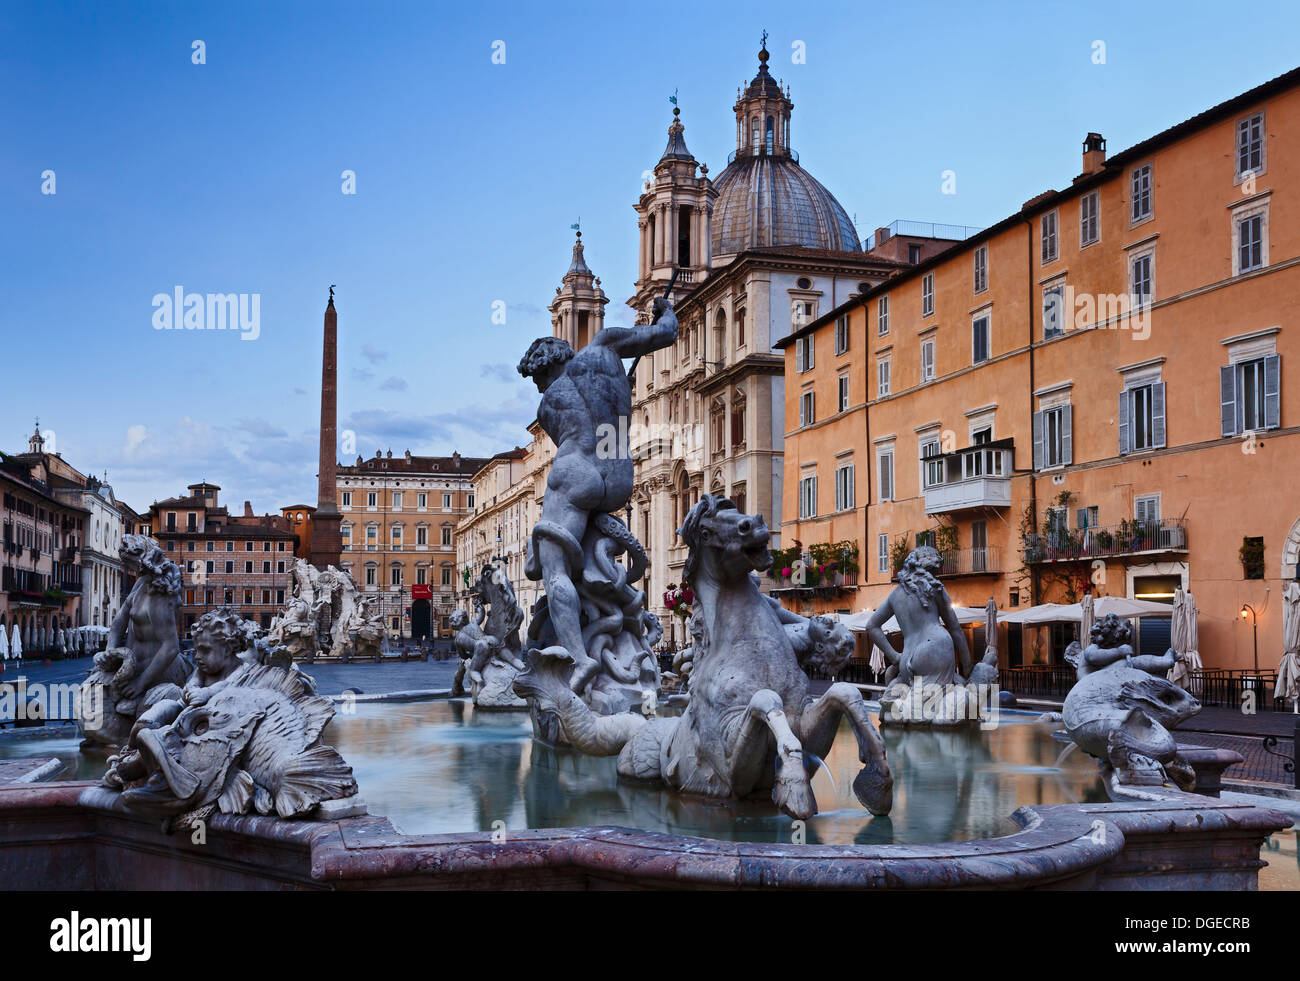 Italy Rome Piazza Navona square at sunrise landmark fountains and catholic church baroque art monuments blurred water four river Stock Photo